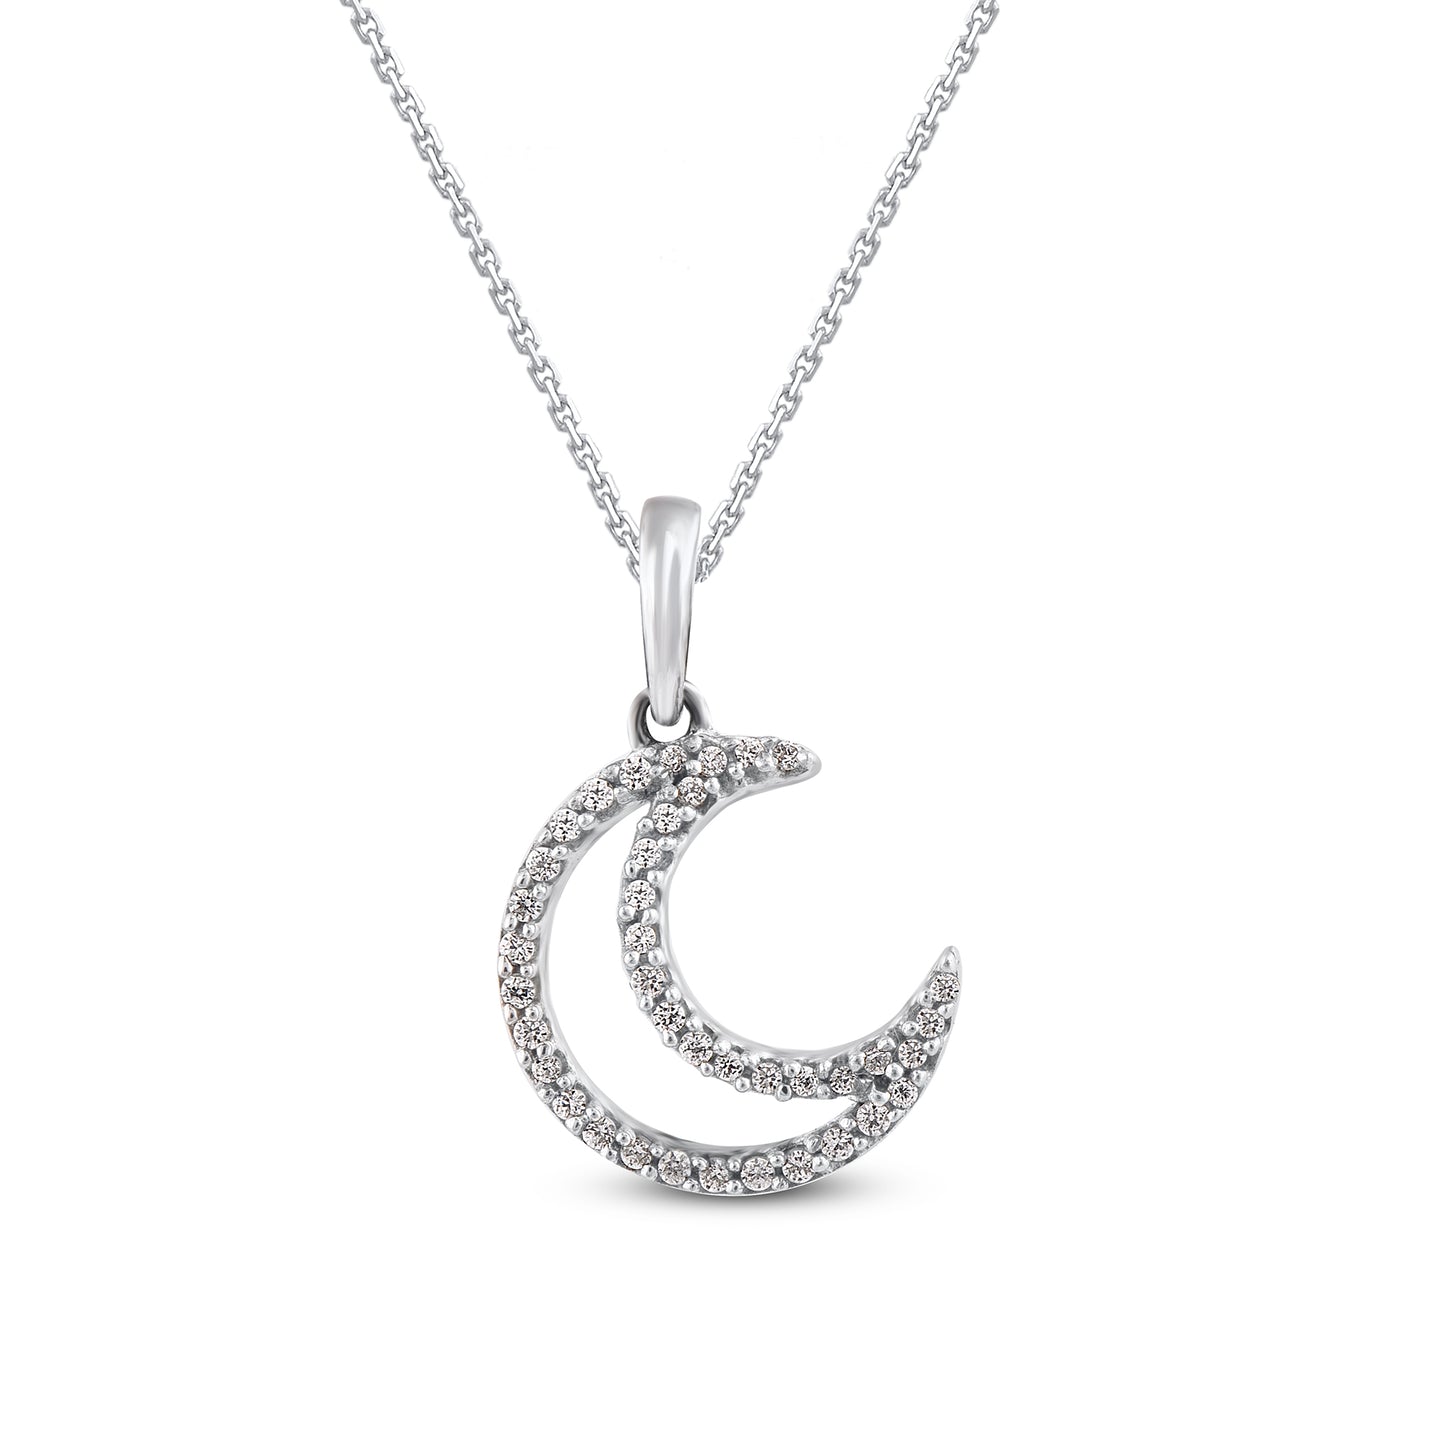 Crescent Moon Pendant Necklace in 925 Sterling Silver